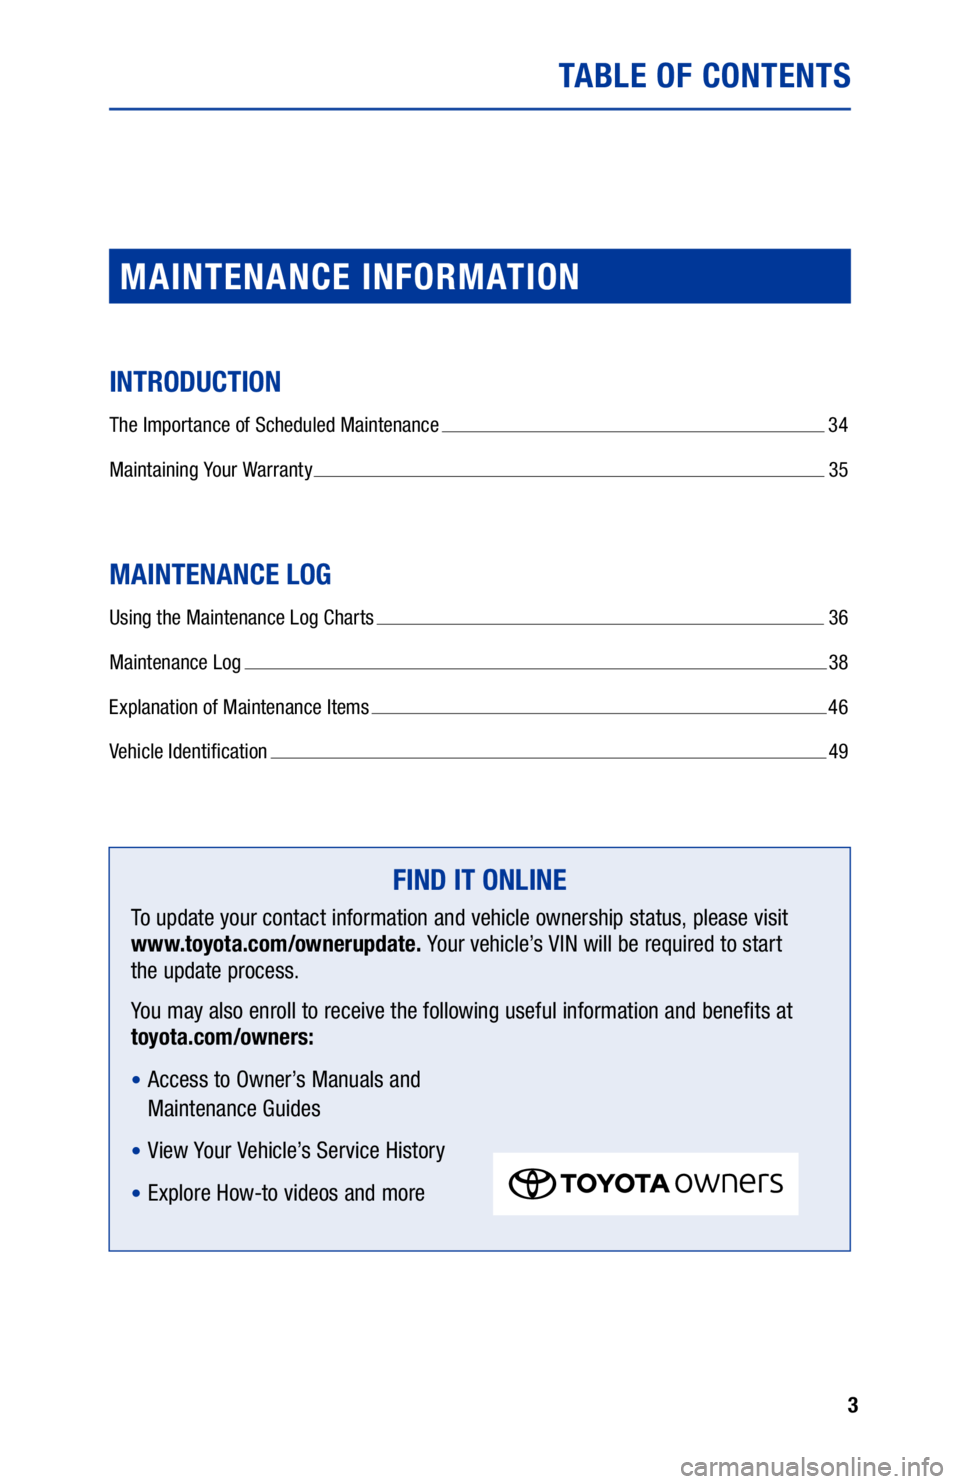 TOYOTA YARIS 2020  Warranties & Maintenance Guides (in English) 3
TABLE OF CONTENTS
MAINTENANCE INFORMATION
INTRODUCTION
The Importance of Scheduled Maintenance  34
Maintaining Your Warranty 
  35
MAINTENANCE LOG
Using the Maintenance Log Charts  36
Maintenance Lo